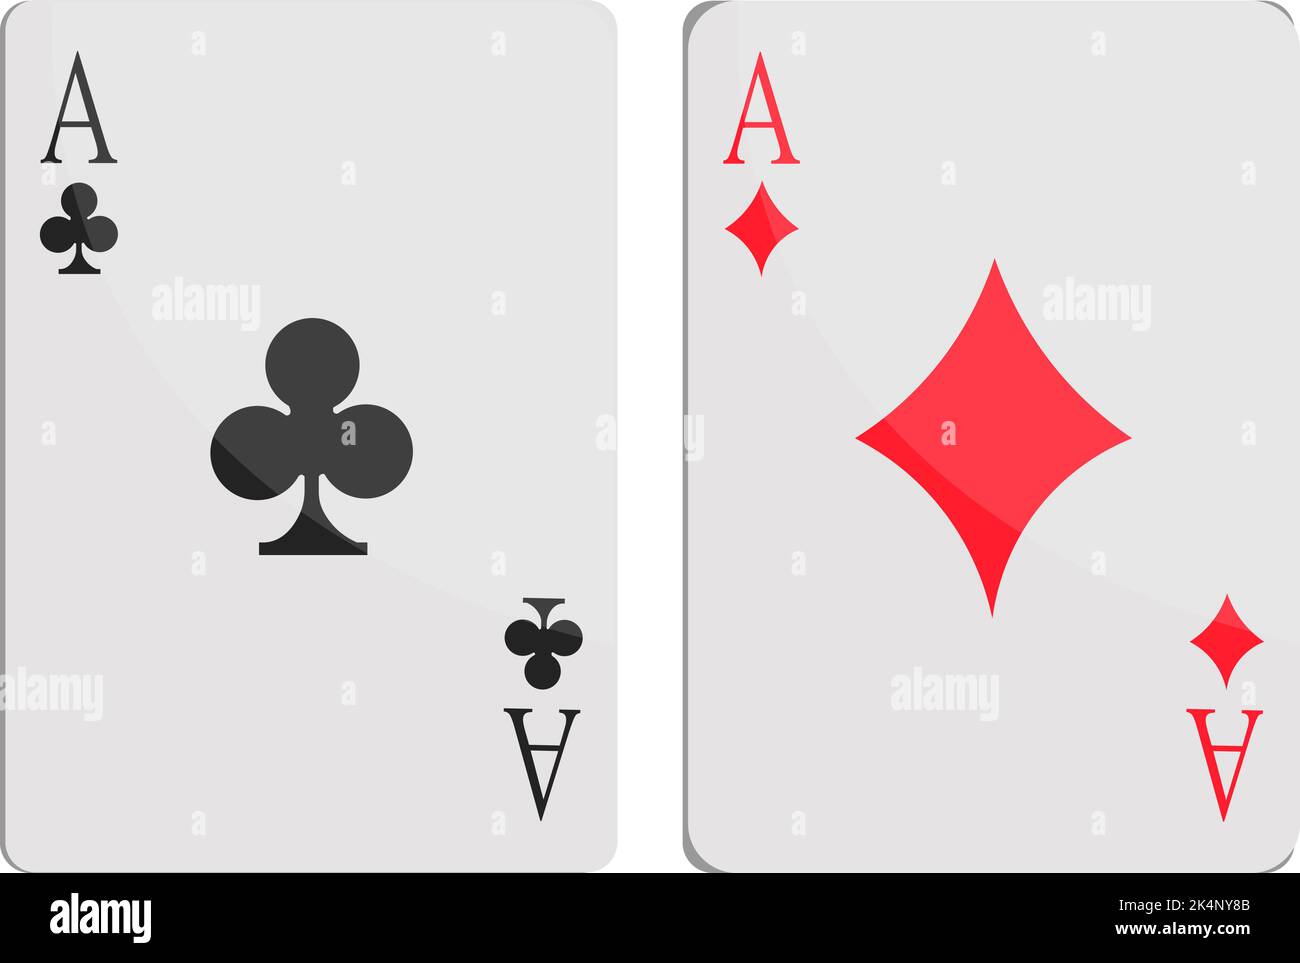 Two Pair Poker Images – Browse 13 Stock Photos, Vectors, and